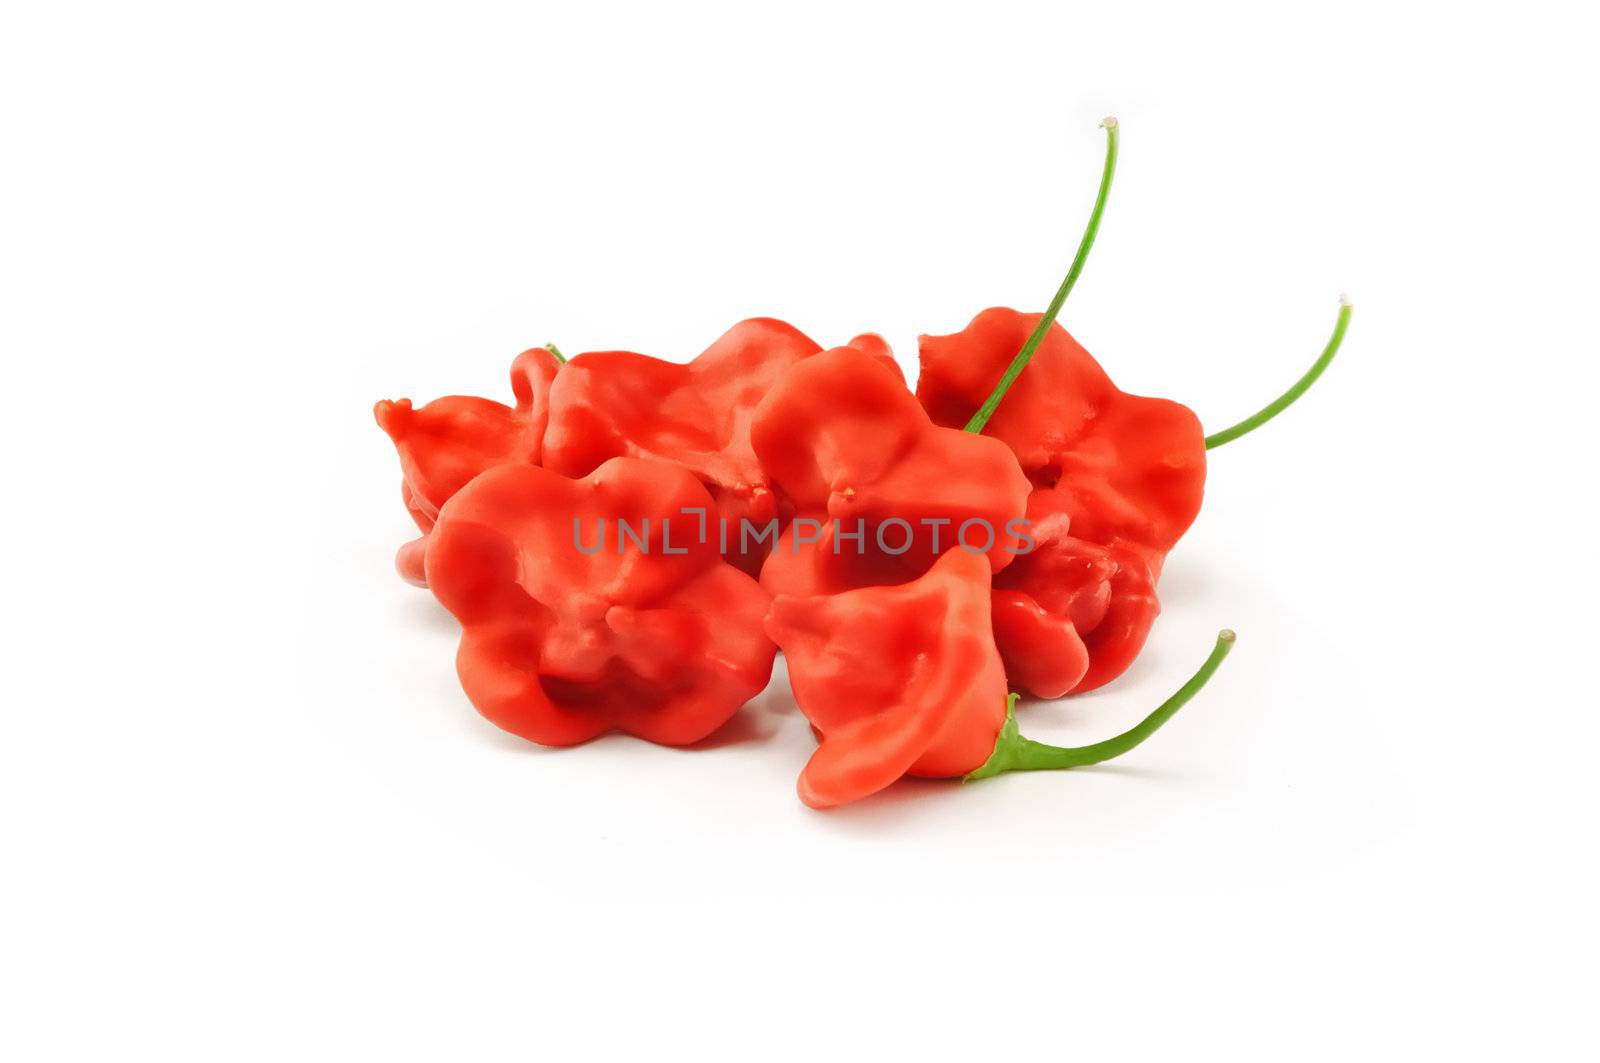 Red hot pepper on a white background, close-up